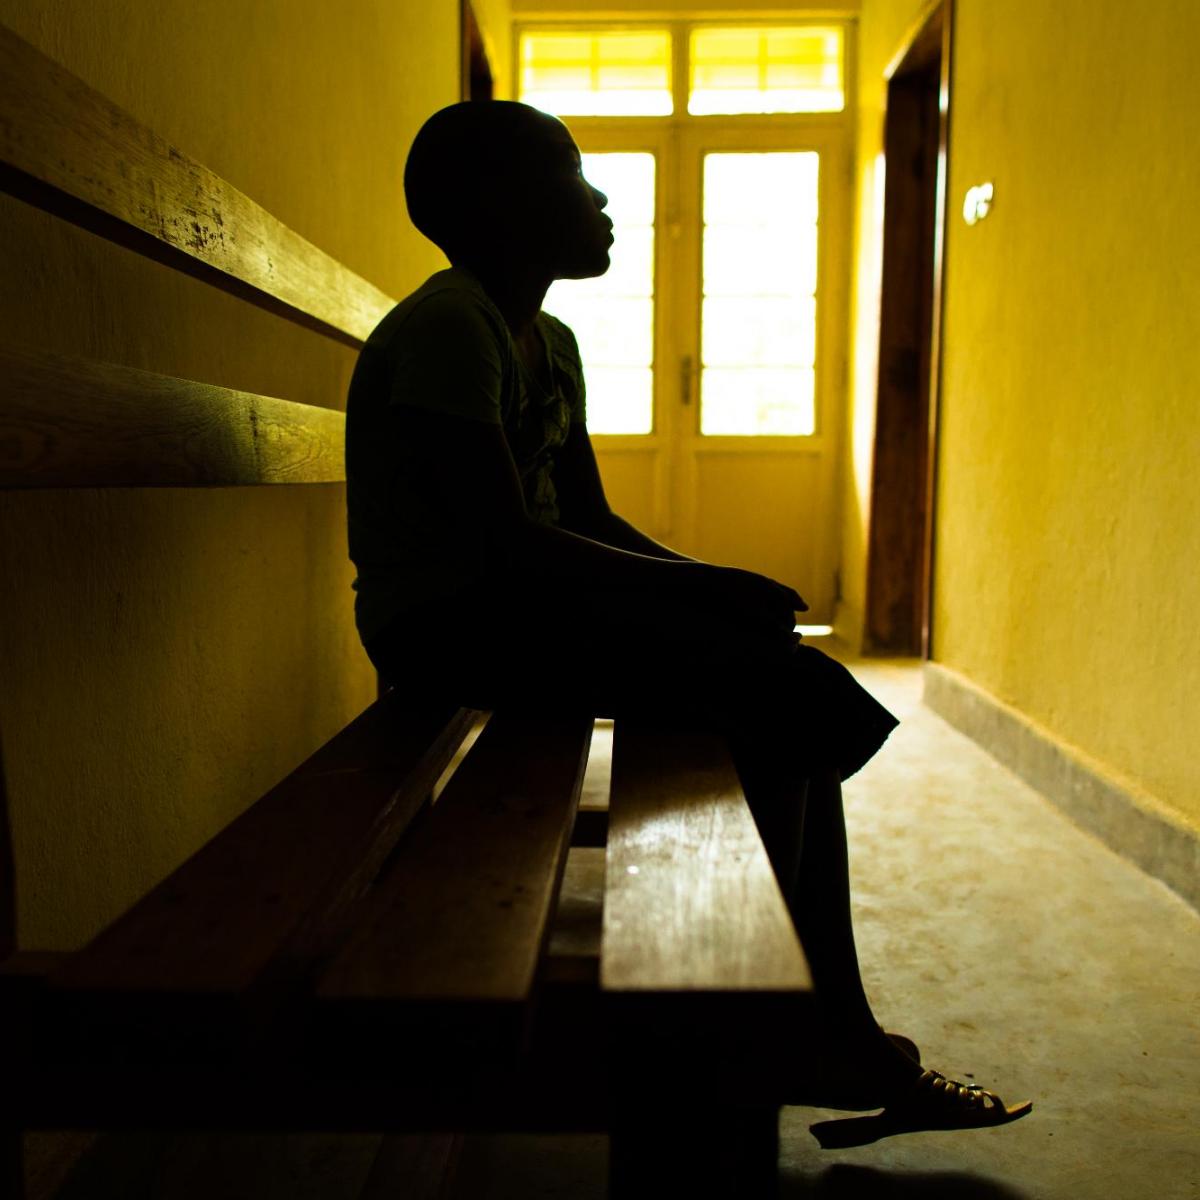 A person in silhouette sits on a bench in a hallway.